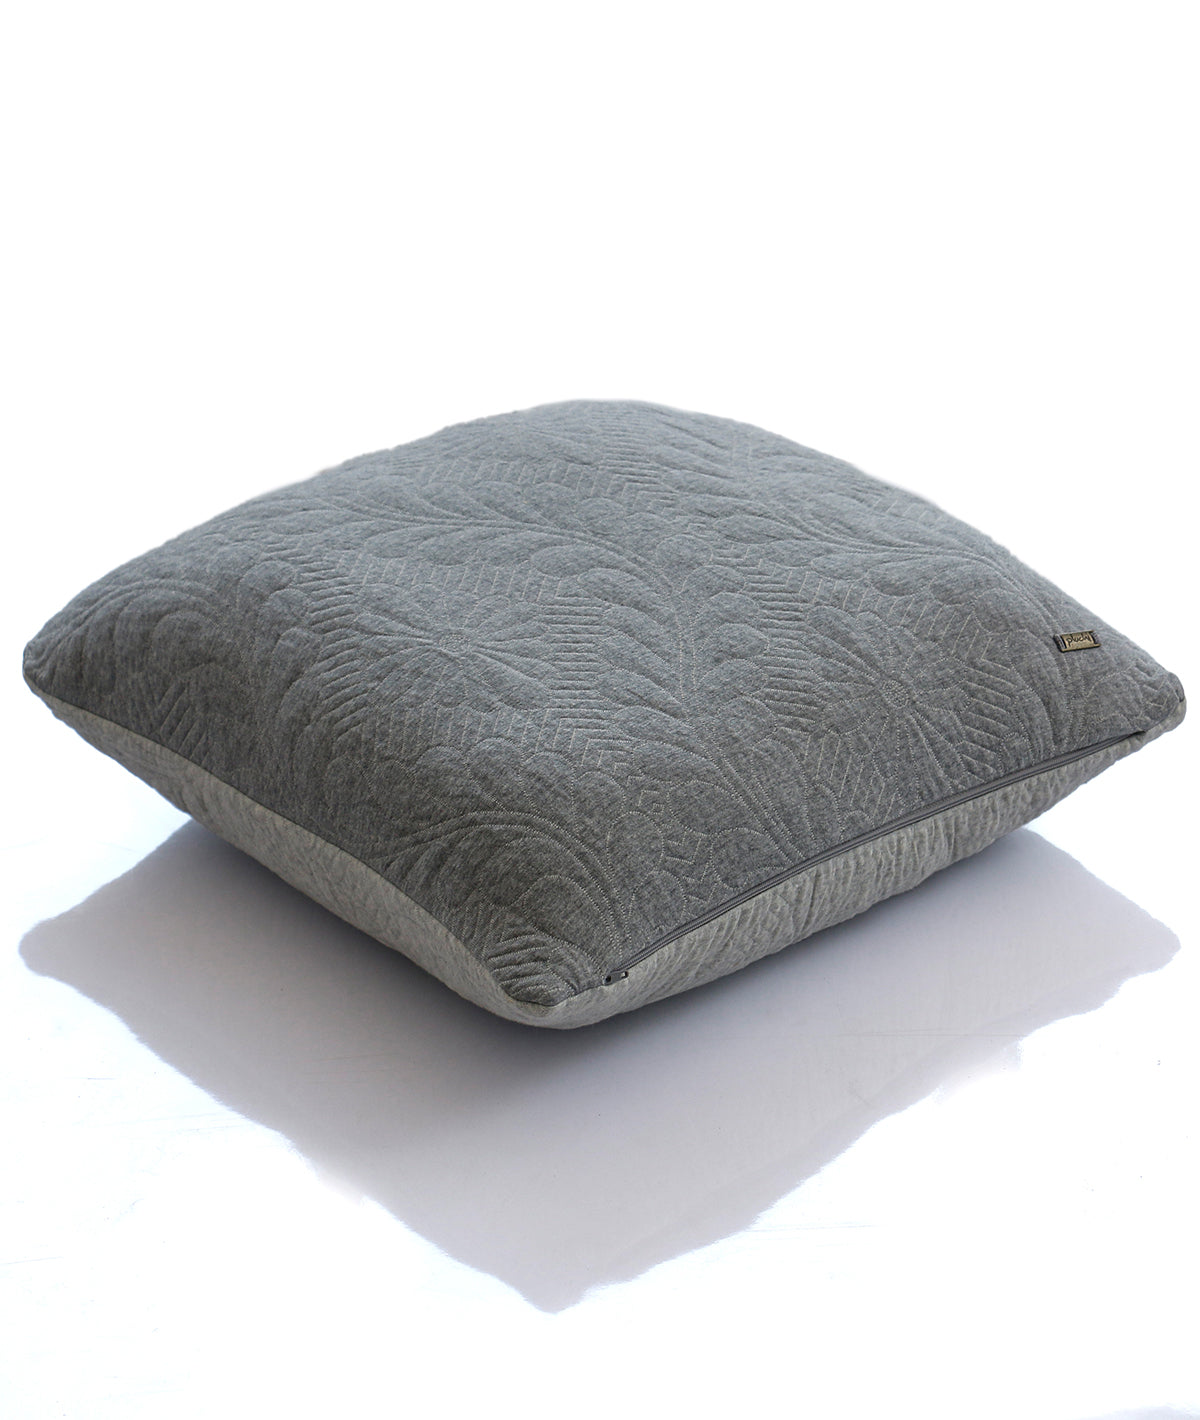 Flora Cotton Knitted Decorative Light Grey Melange & Vanilla Grey Melange Color 18 x 18 Inches Cushion Cover